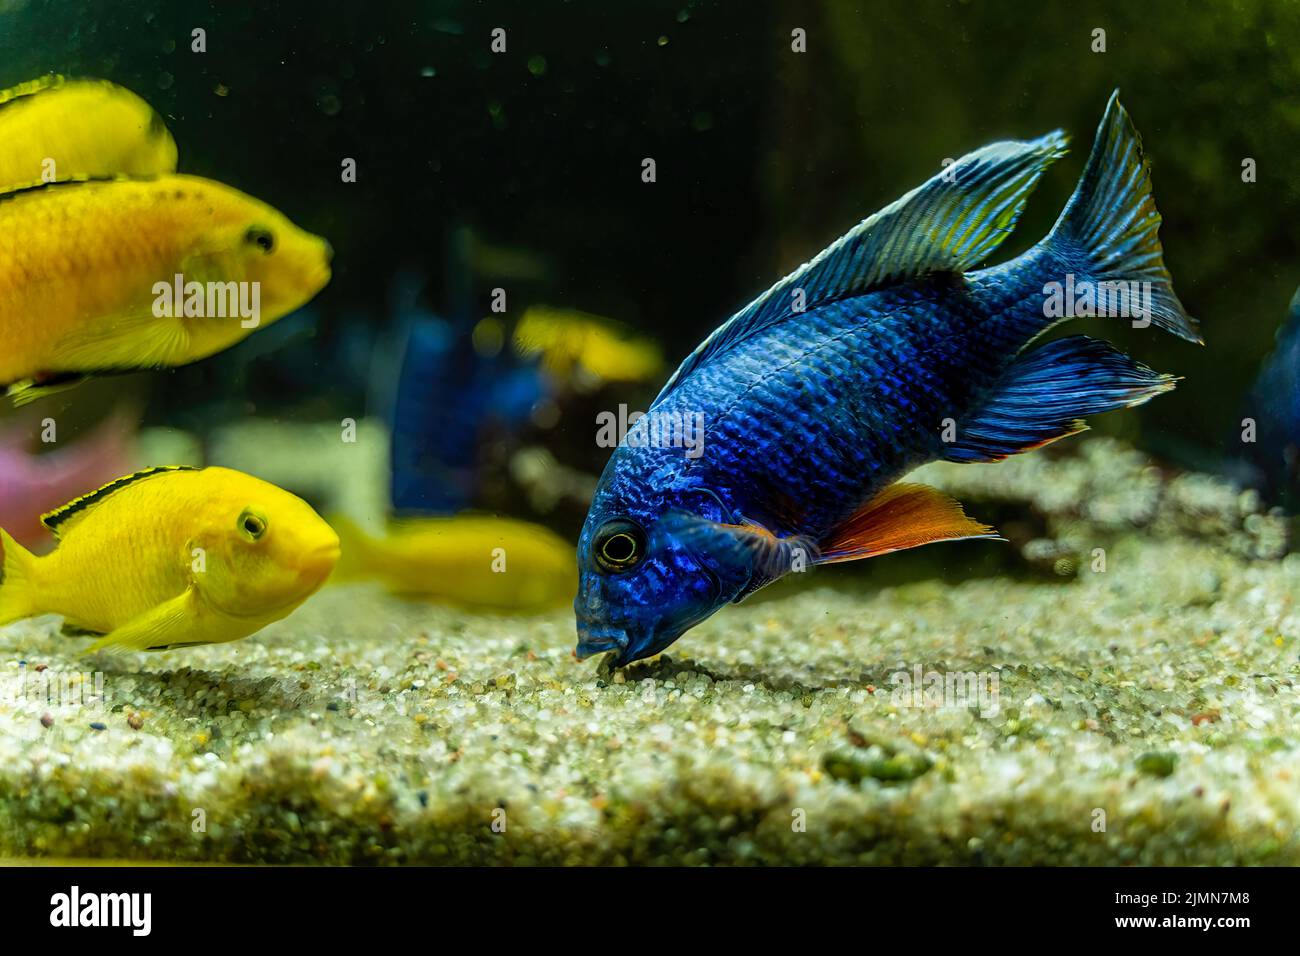 Aulonocara nyassae fish known as the emperor cichlid eating or taking off algae off gravel stone. Blue fish in dark water. Stock Photo